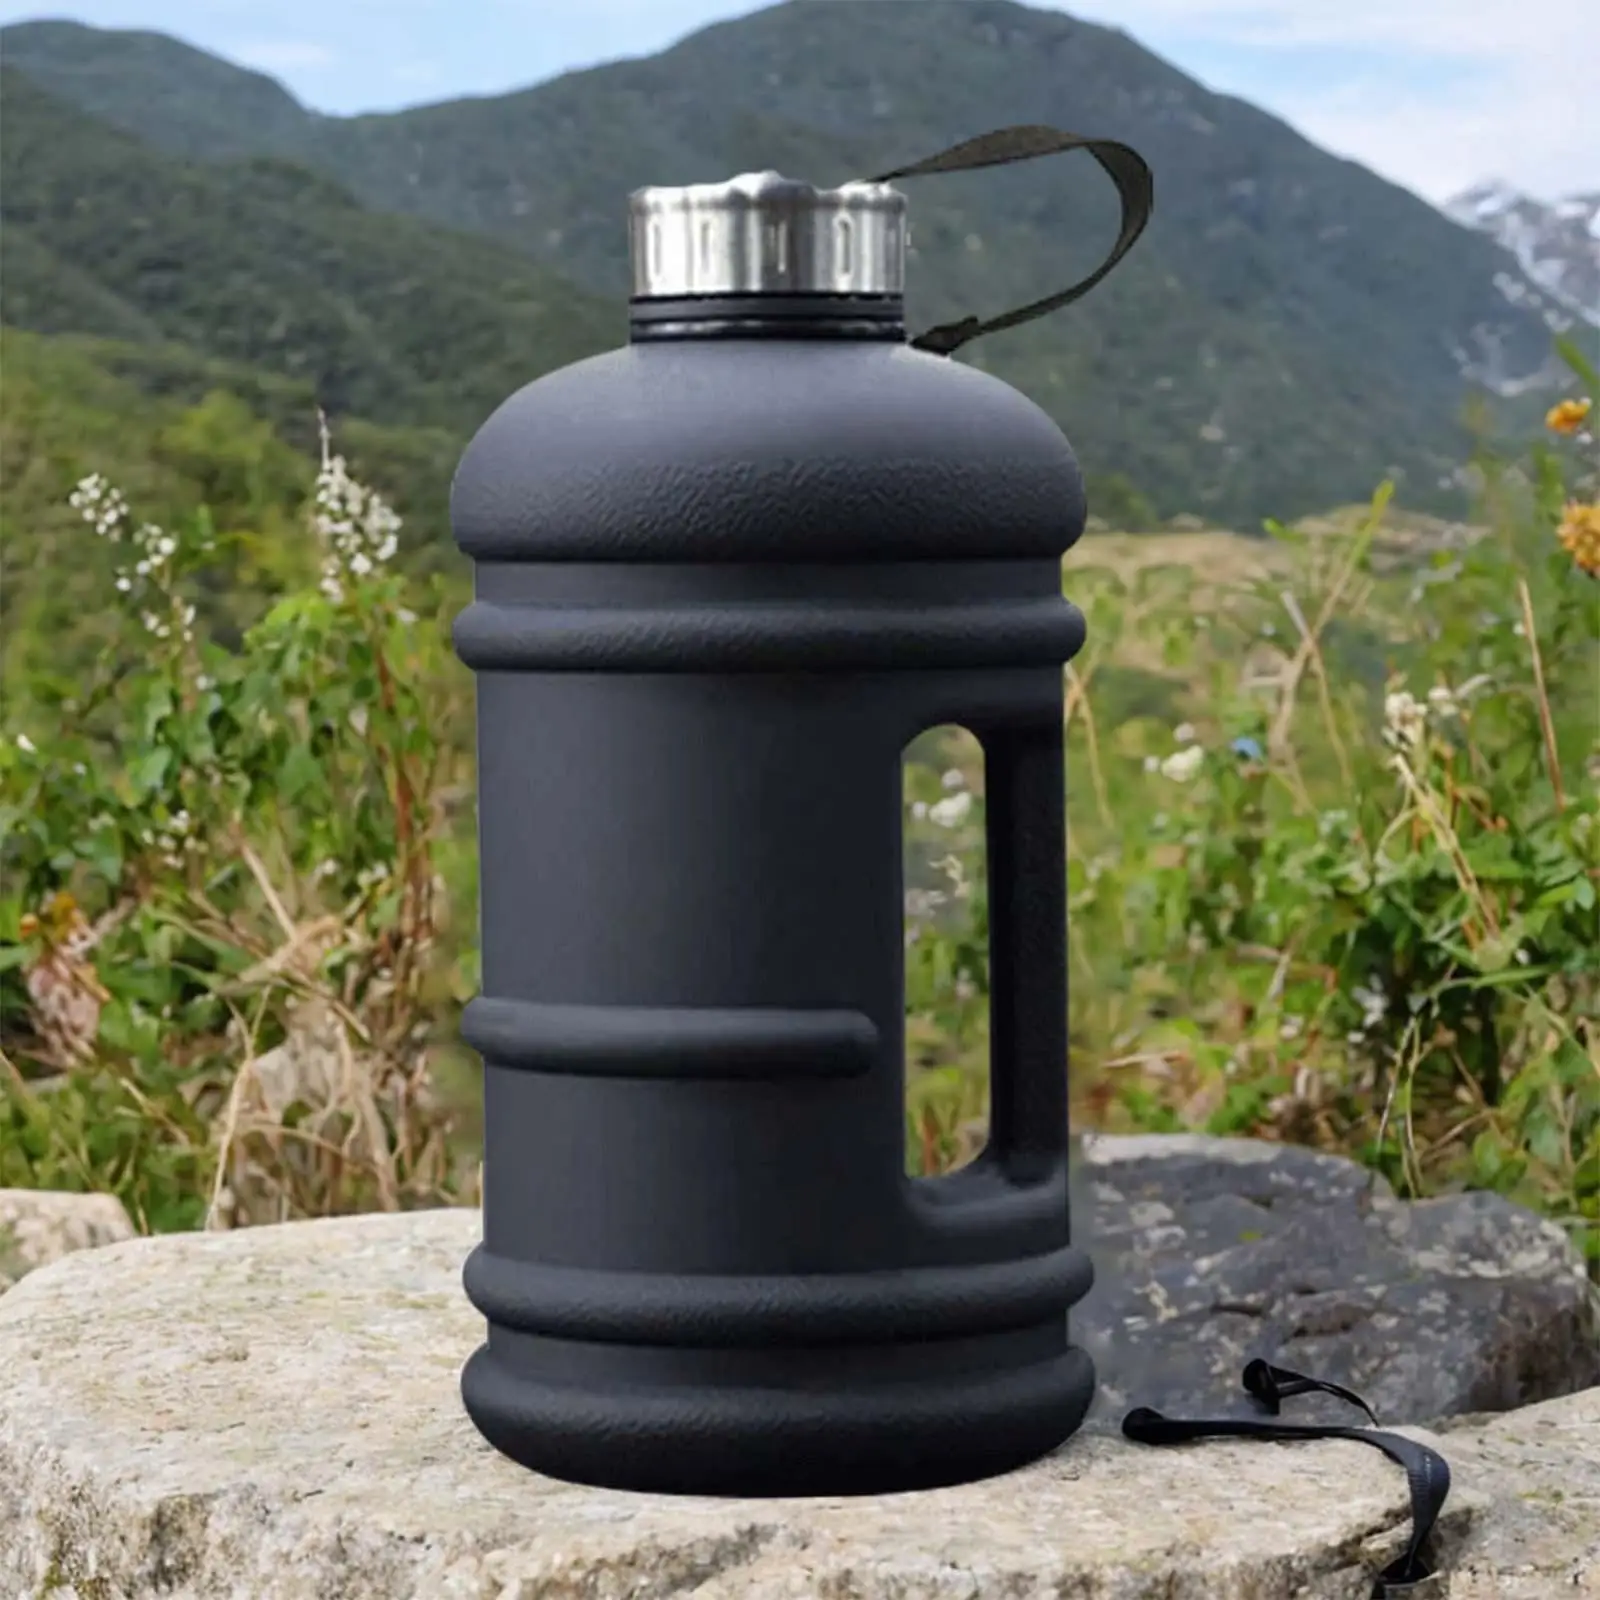 Water Bottle Juice Cup 2.2L Large Capacity Outdoor Sports Bottle Tonnage Bucket for Travel Training Biking Climbing Camping